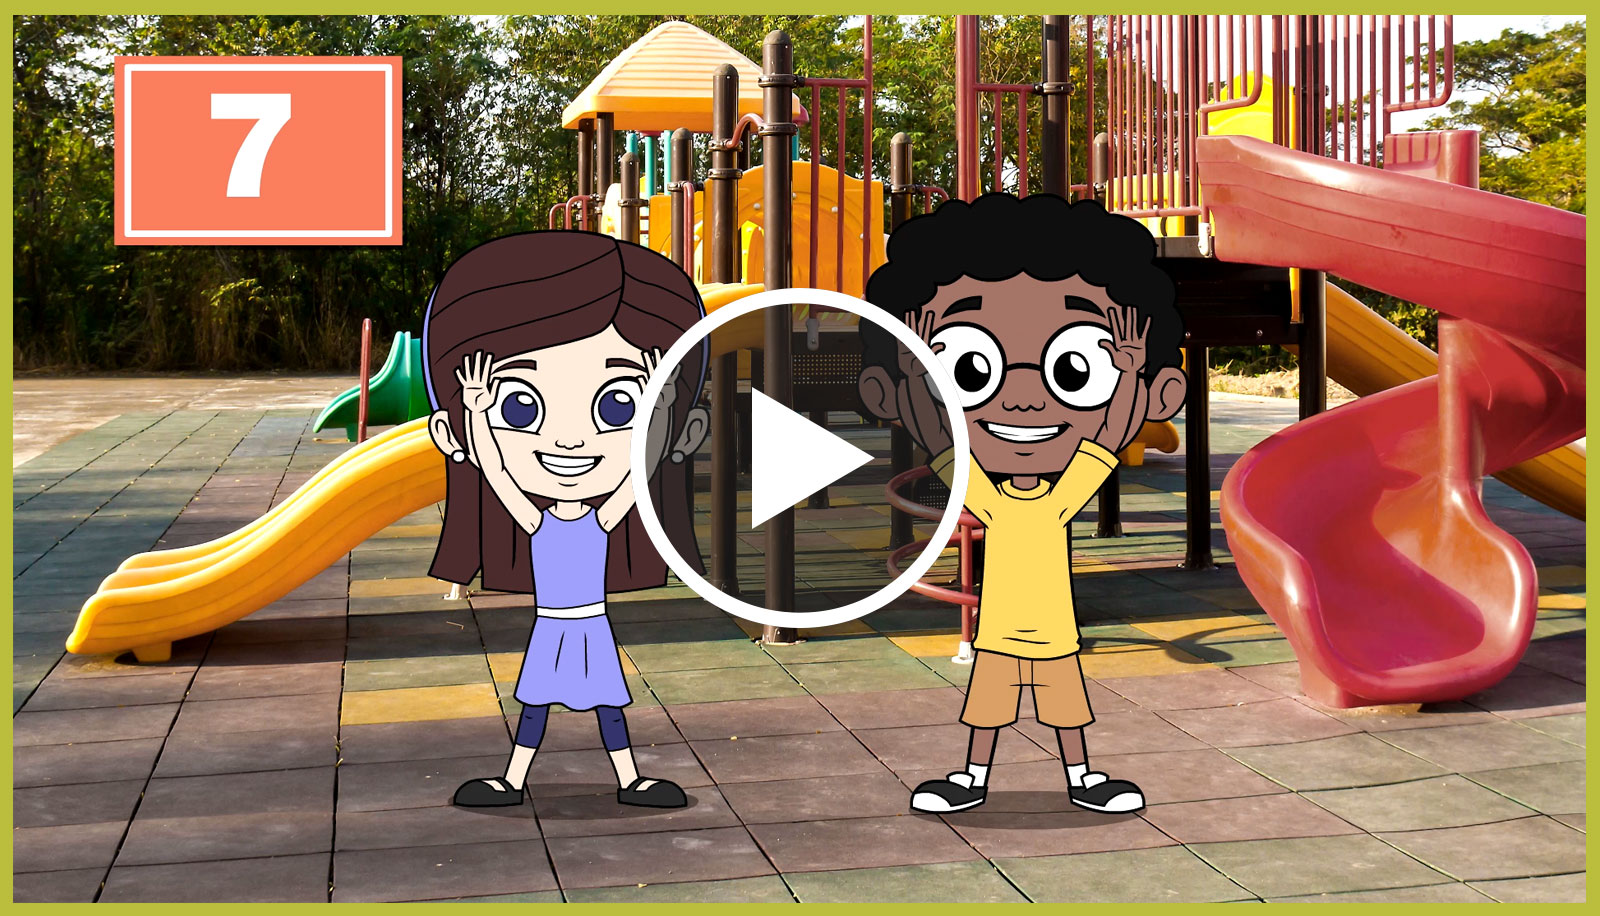 Play physical activity video